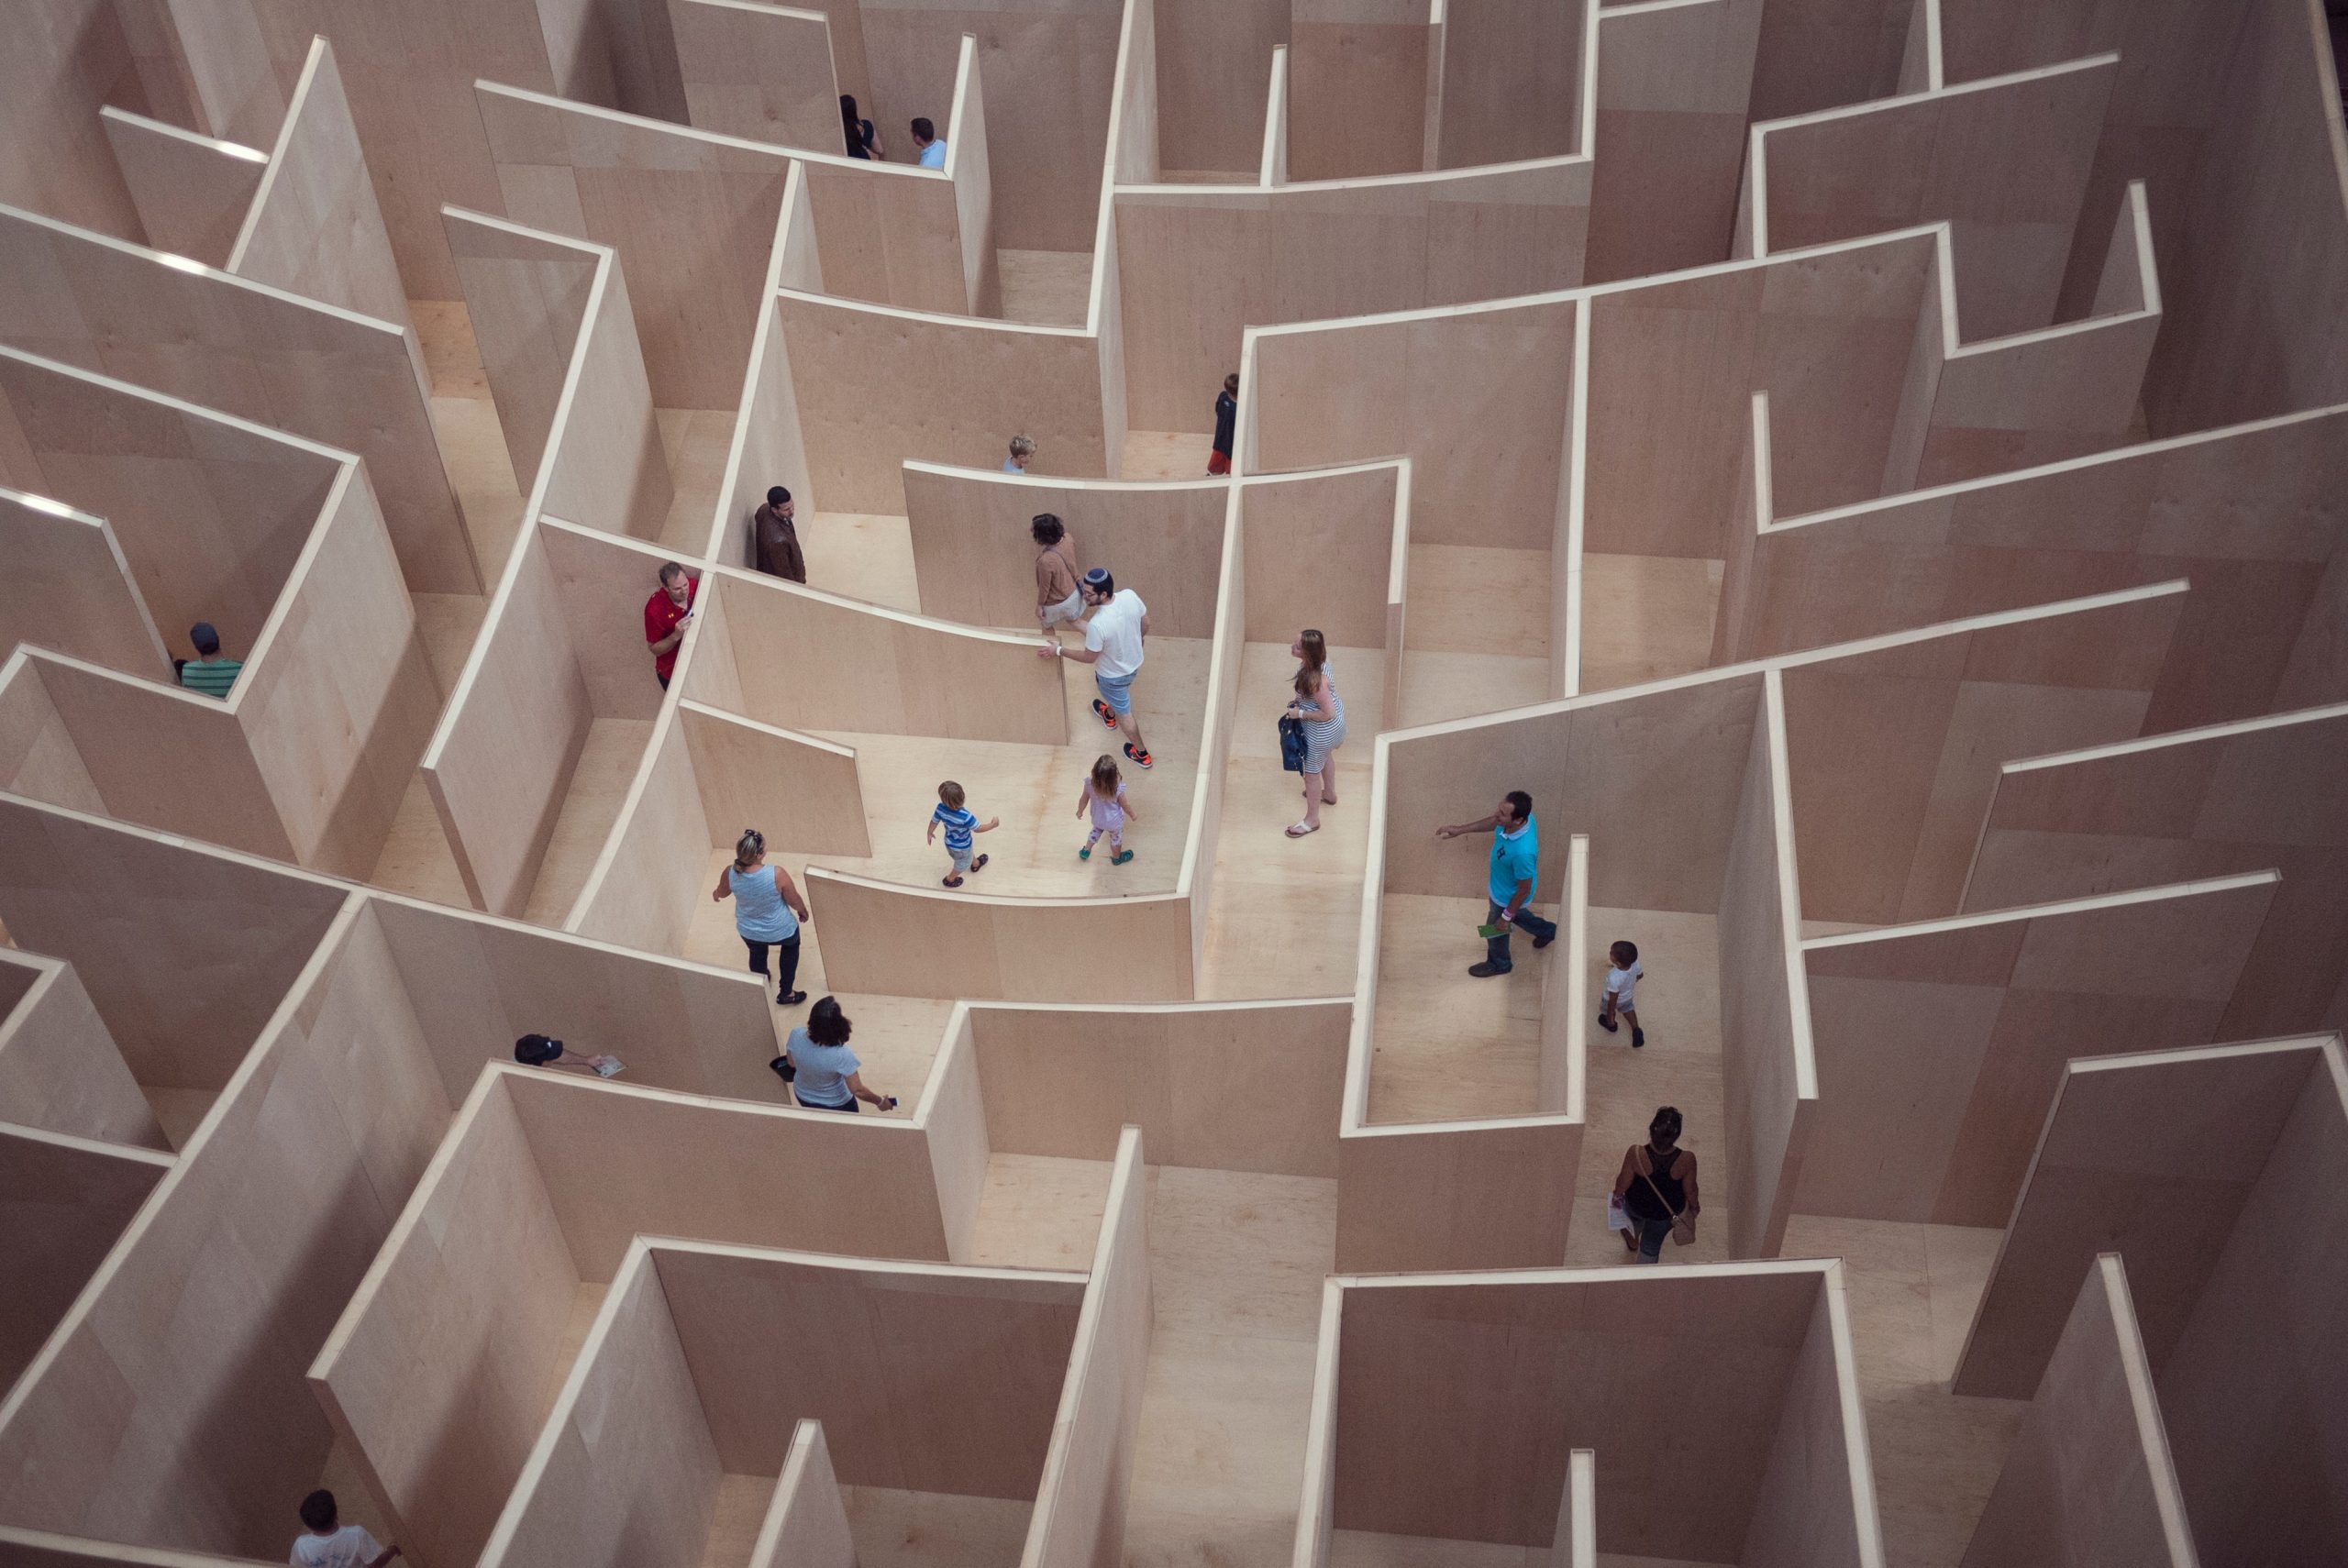 Bird's eye view of a wooden maze with approximately 18 people inside. Some adults, some children. Wood is of a light colour, some of the wooden walls are low and can be seen over. Others are much taller than the people.